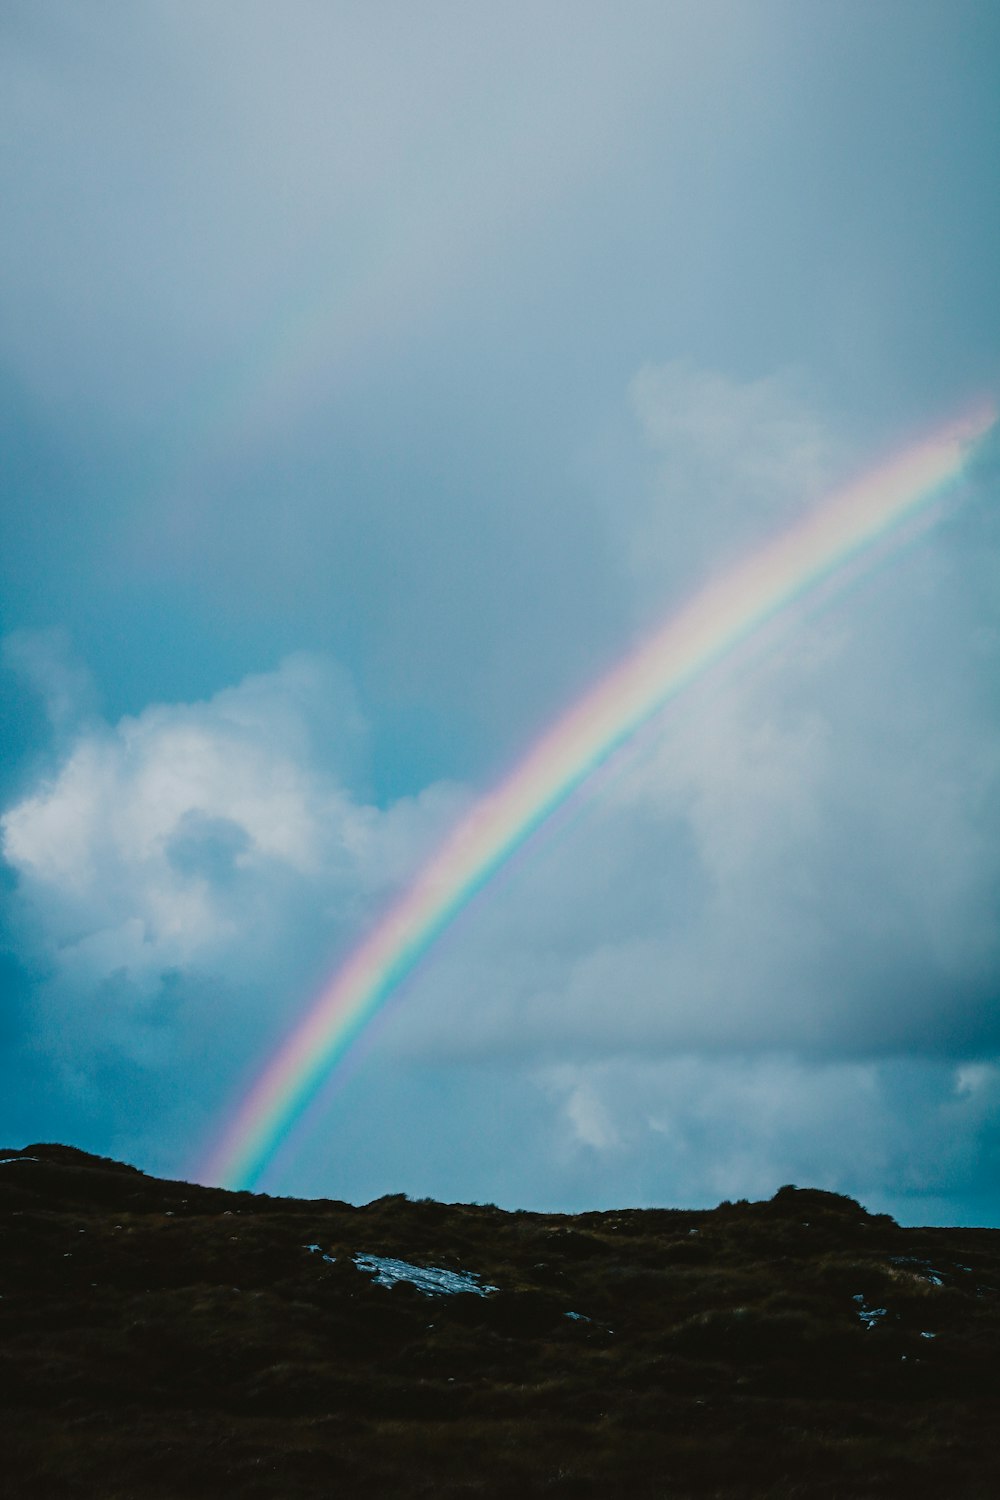 Rainbow Wallpaper Pictures  Download Free Images on Unsplash